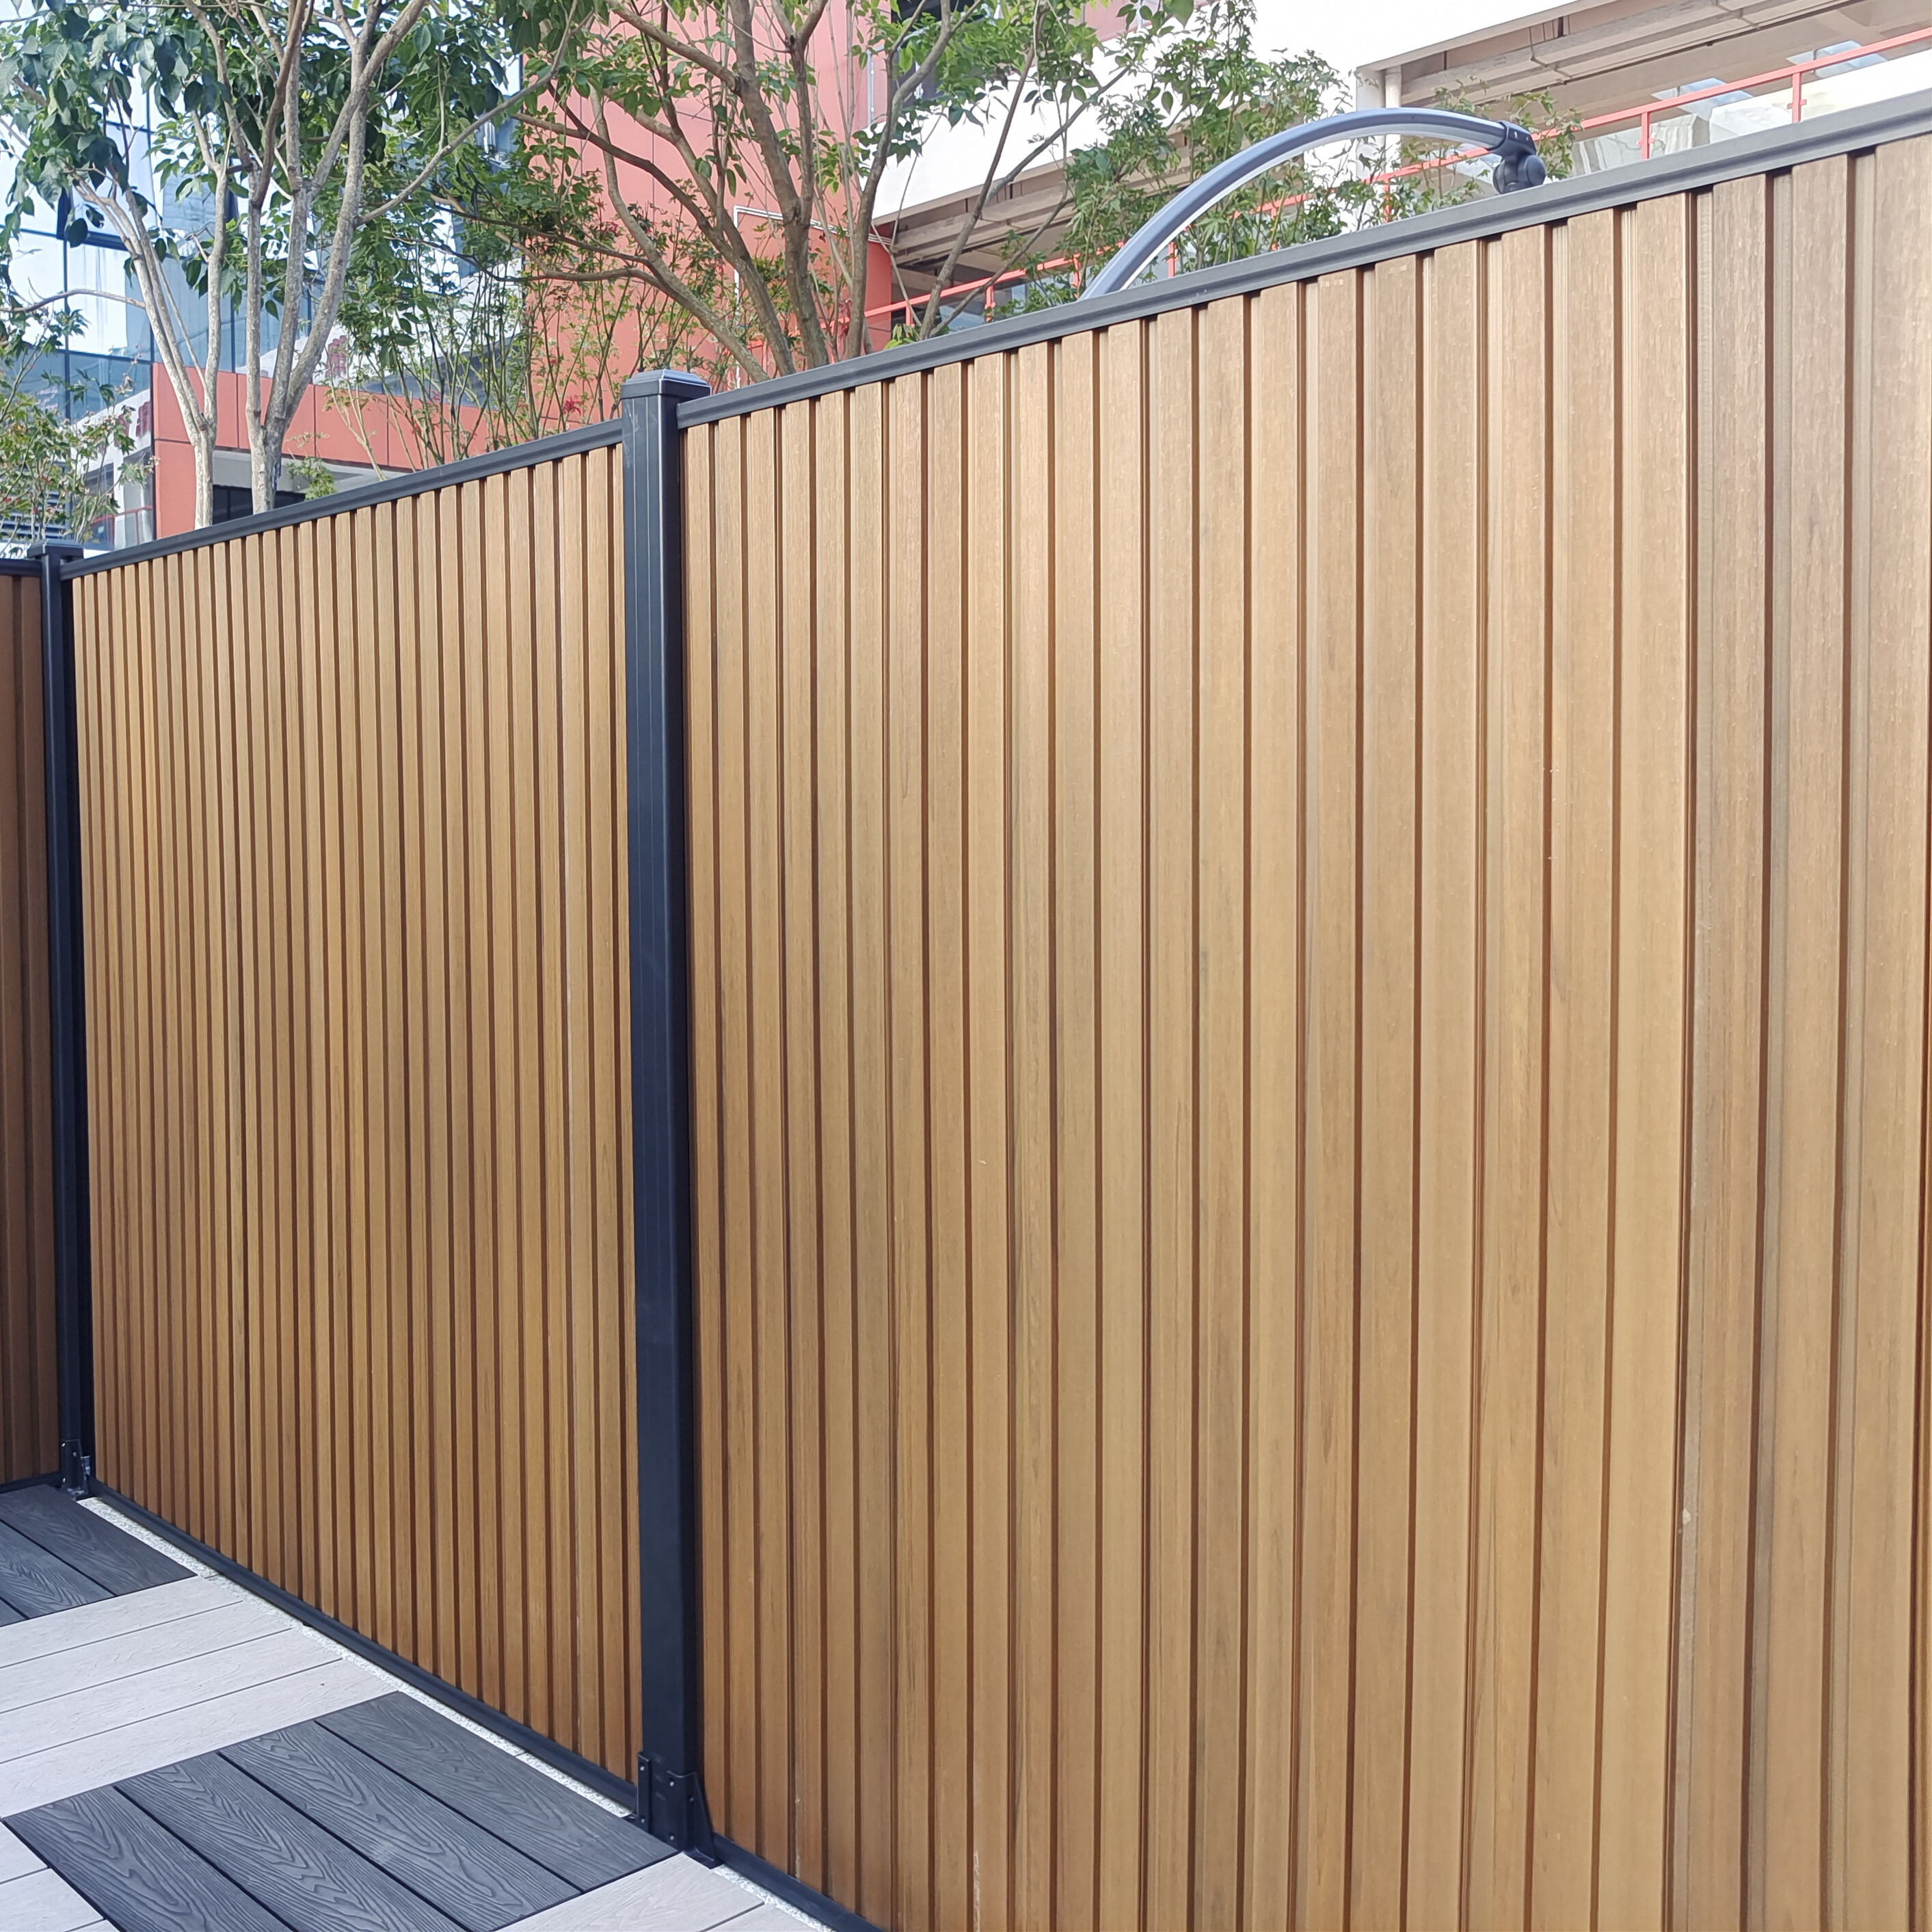 composite slat wall fence factory, composite slat wall fence odm, composite slat wall fence company, composite slat wall fence exporter, composite slat wall fence oem